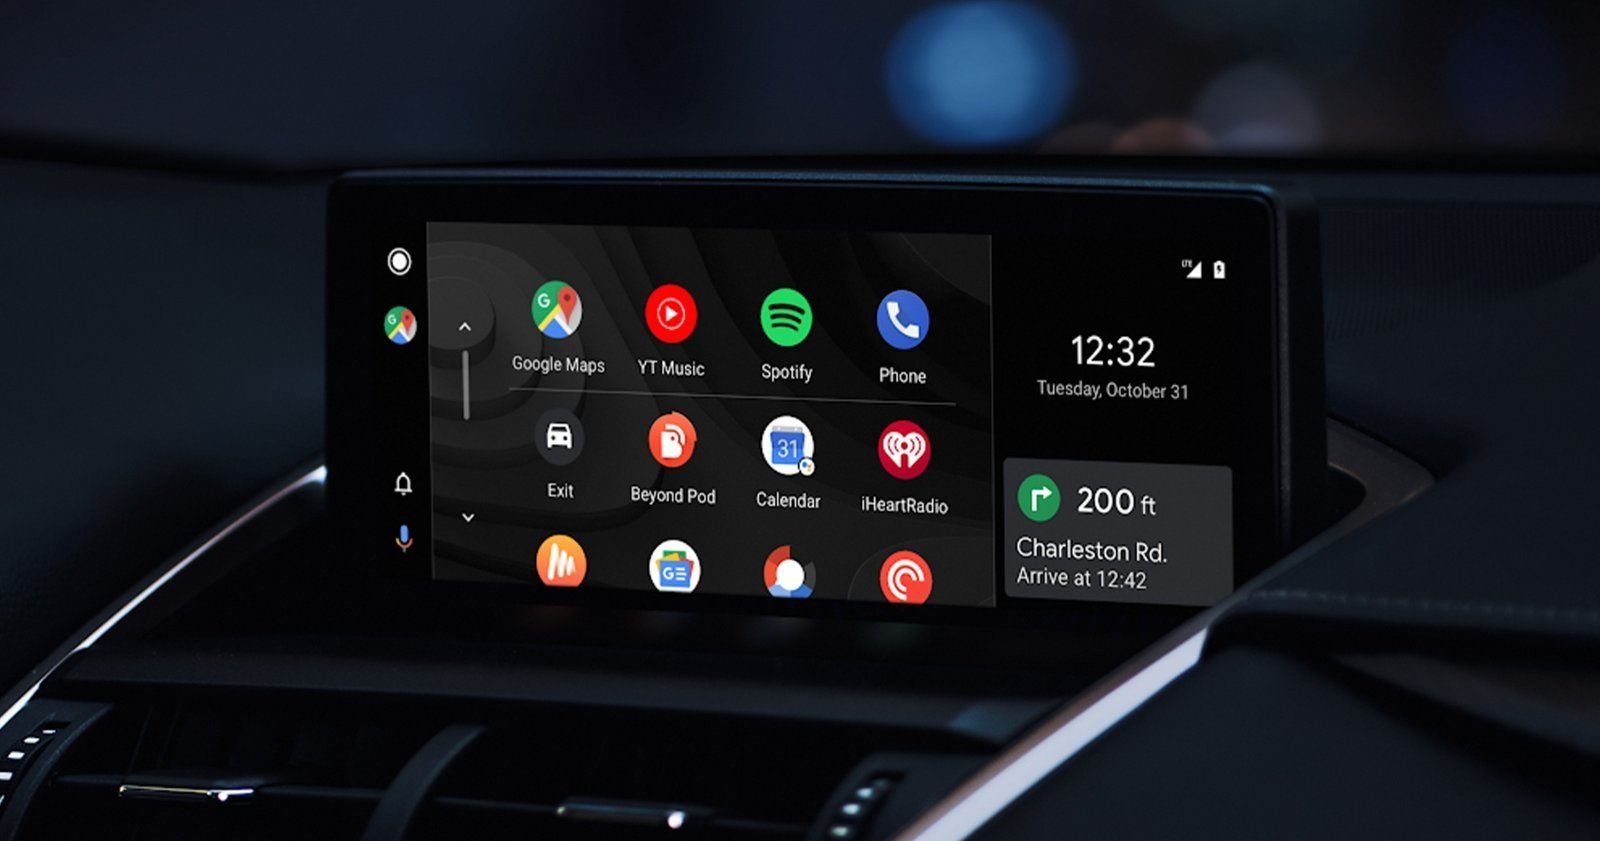 Apps in Android Auto